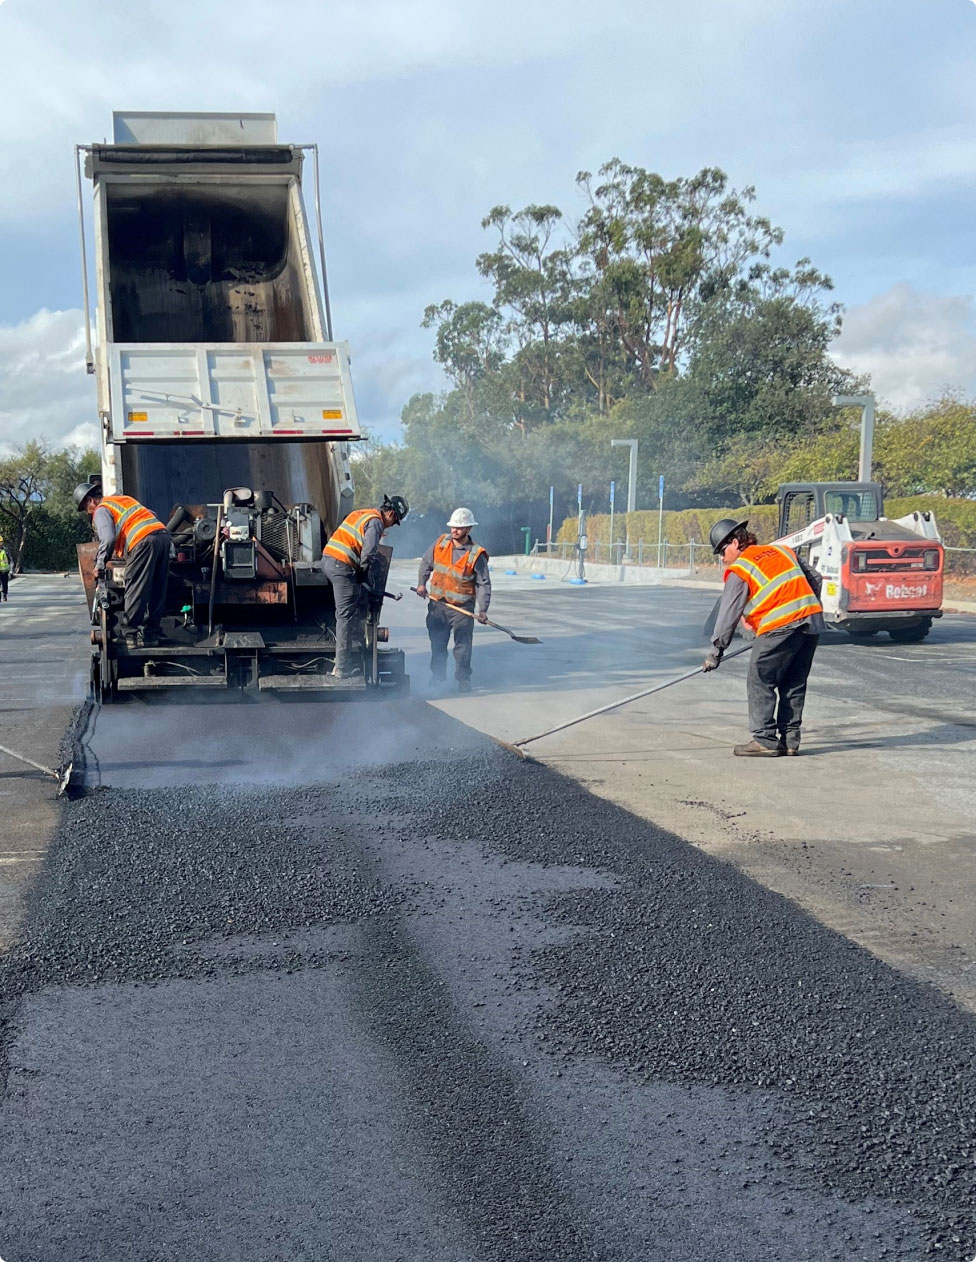 cavlac paving in San Jose concrete and asphalt workers